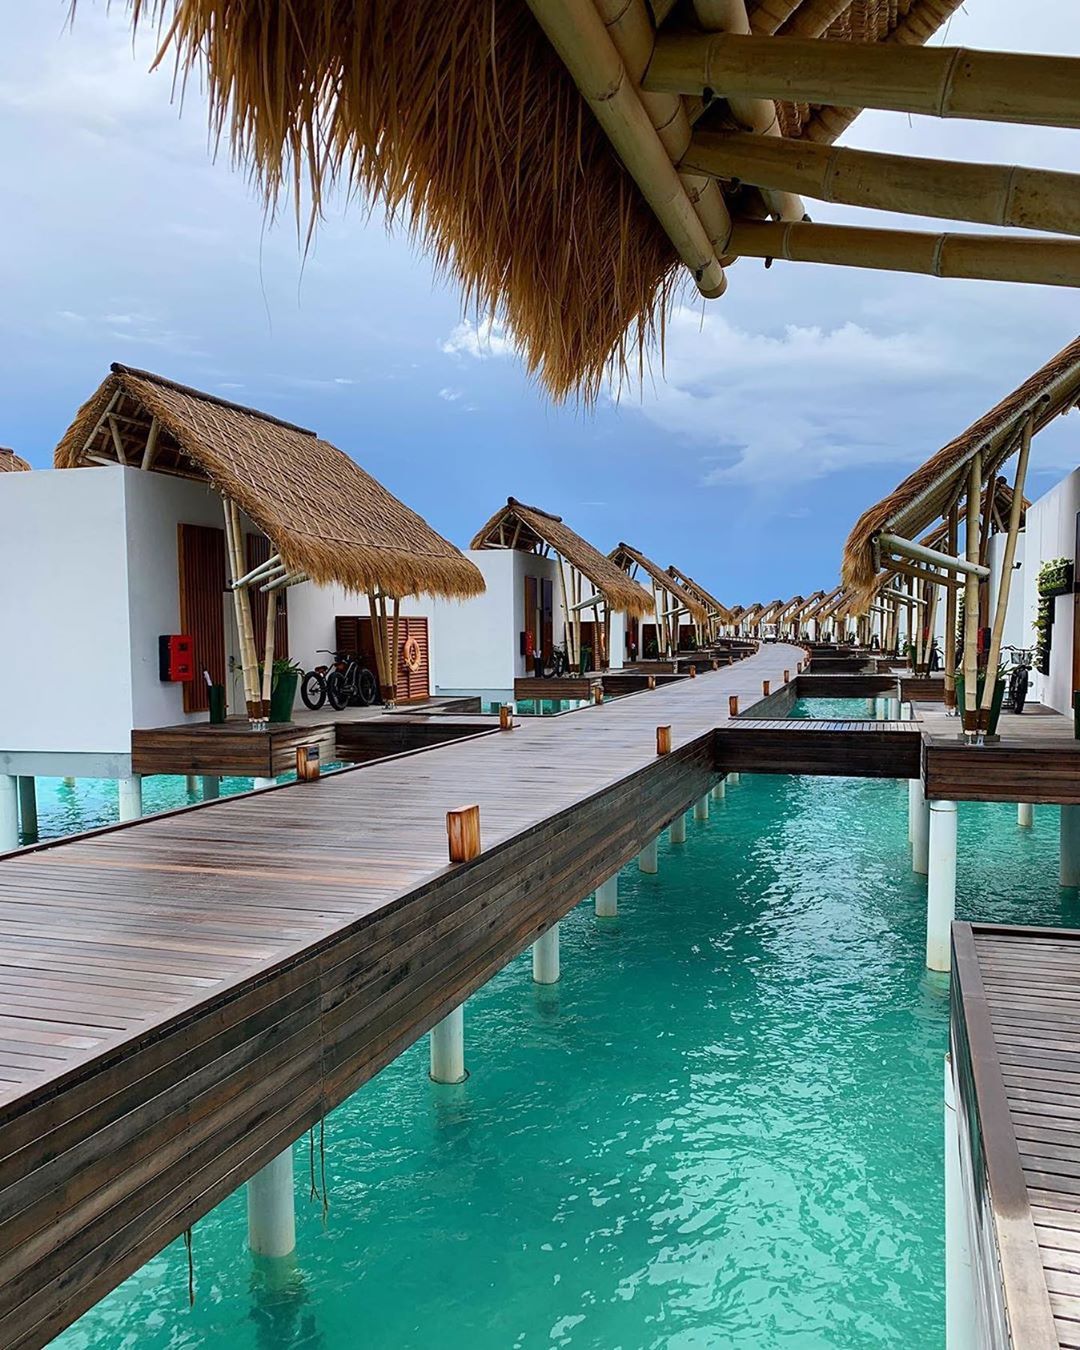 “Over-water bungalows? Tick. Sparkling blue waters? Tick. White sand beaches? Tick. Floating breakfasts? Tick. Emerald Maldives Resort & Spa meets all the picture-perfect, Instagram-approved boxes…”
Find out more about what @countryandtownhouse’s
@elliesmith24 has to say about @emeraldmaldivesresortspa by visiting their website. 📸  @elliesmith24